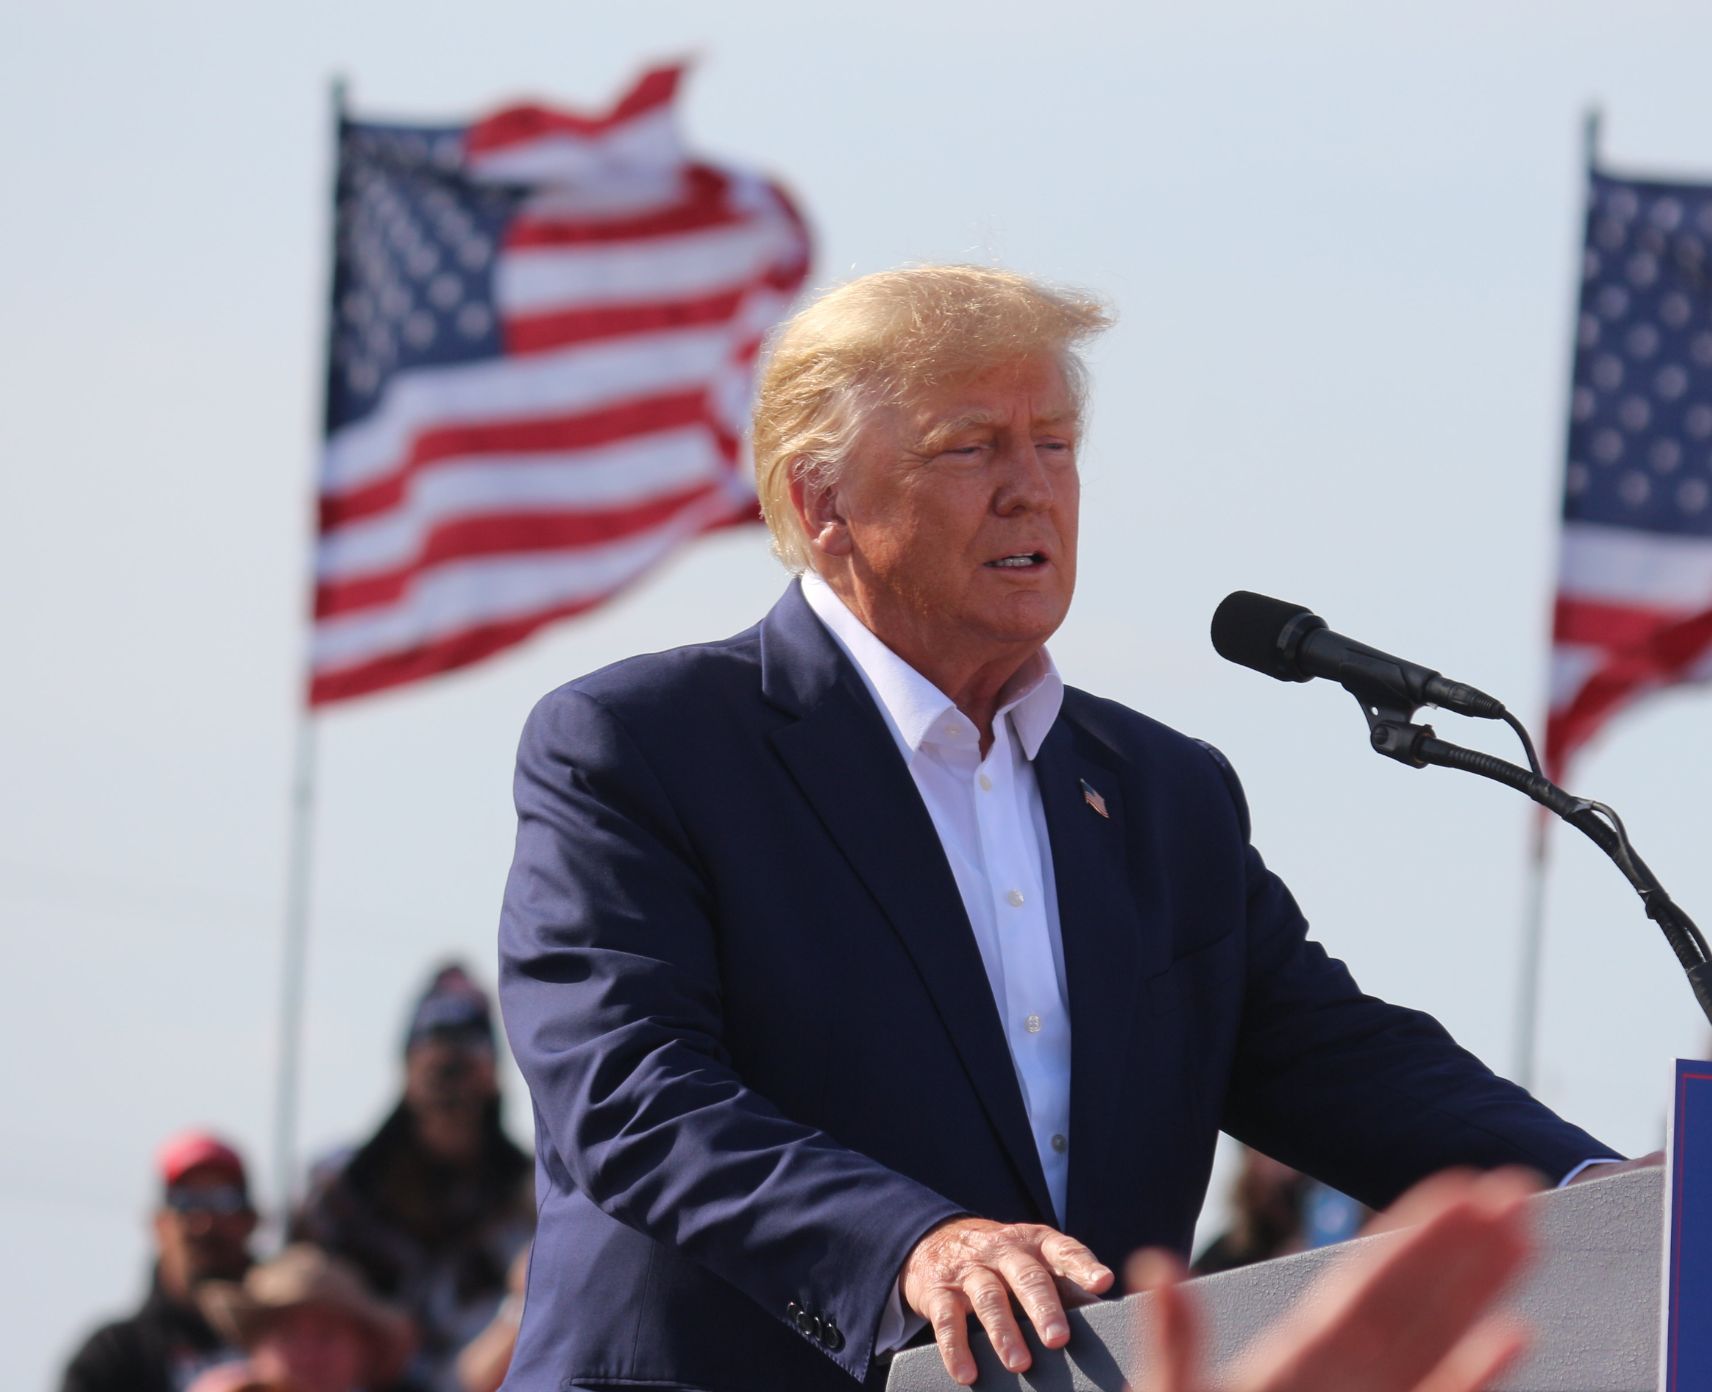 Donald Trump speaks at a political rally in 2022 in front of two American flags